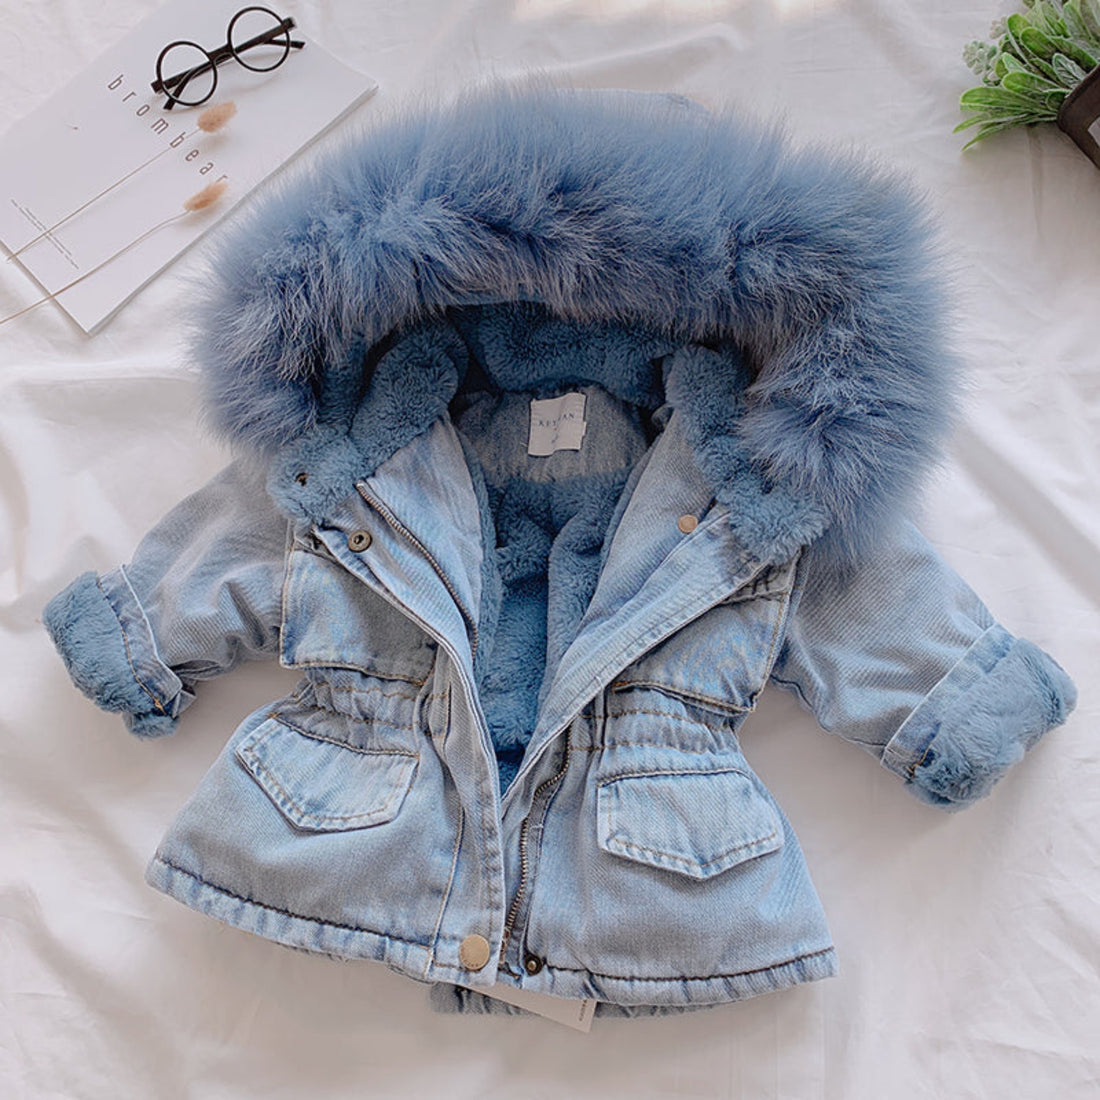 A girl in a fashionable denim jacket, ideal for casual wear.